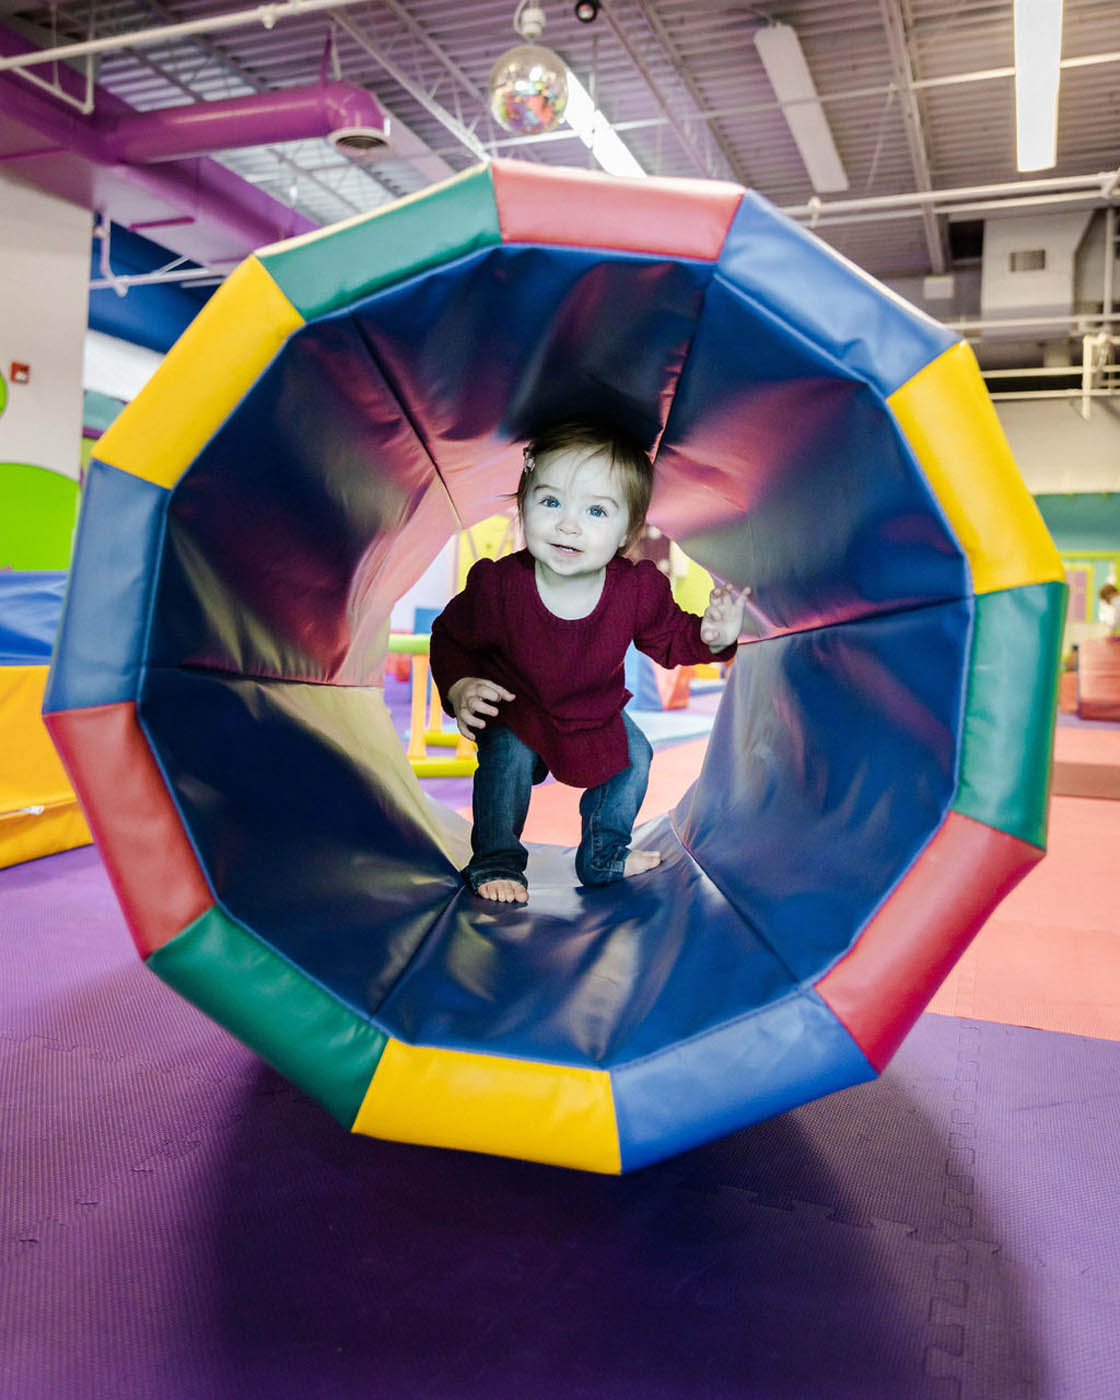 A little girl running through a matt tunnel, contact us for more indoor kids activities in Willow Grove, PA.